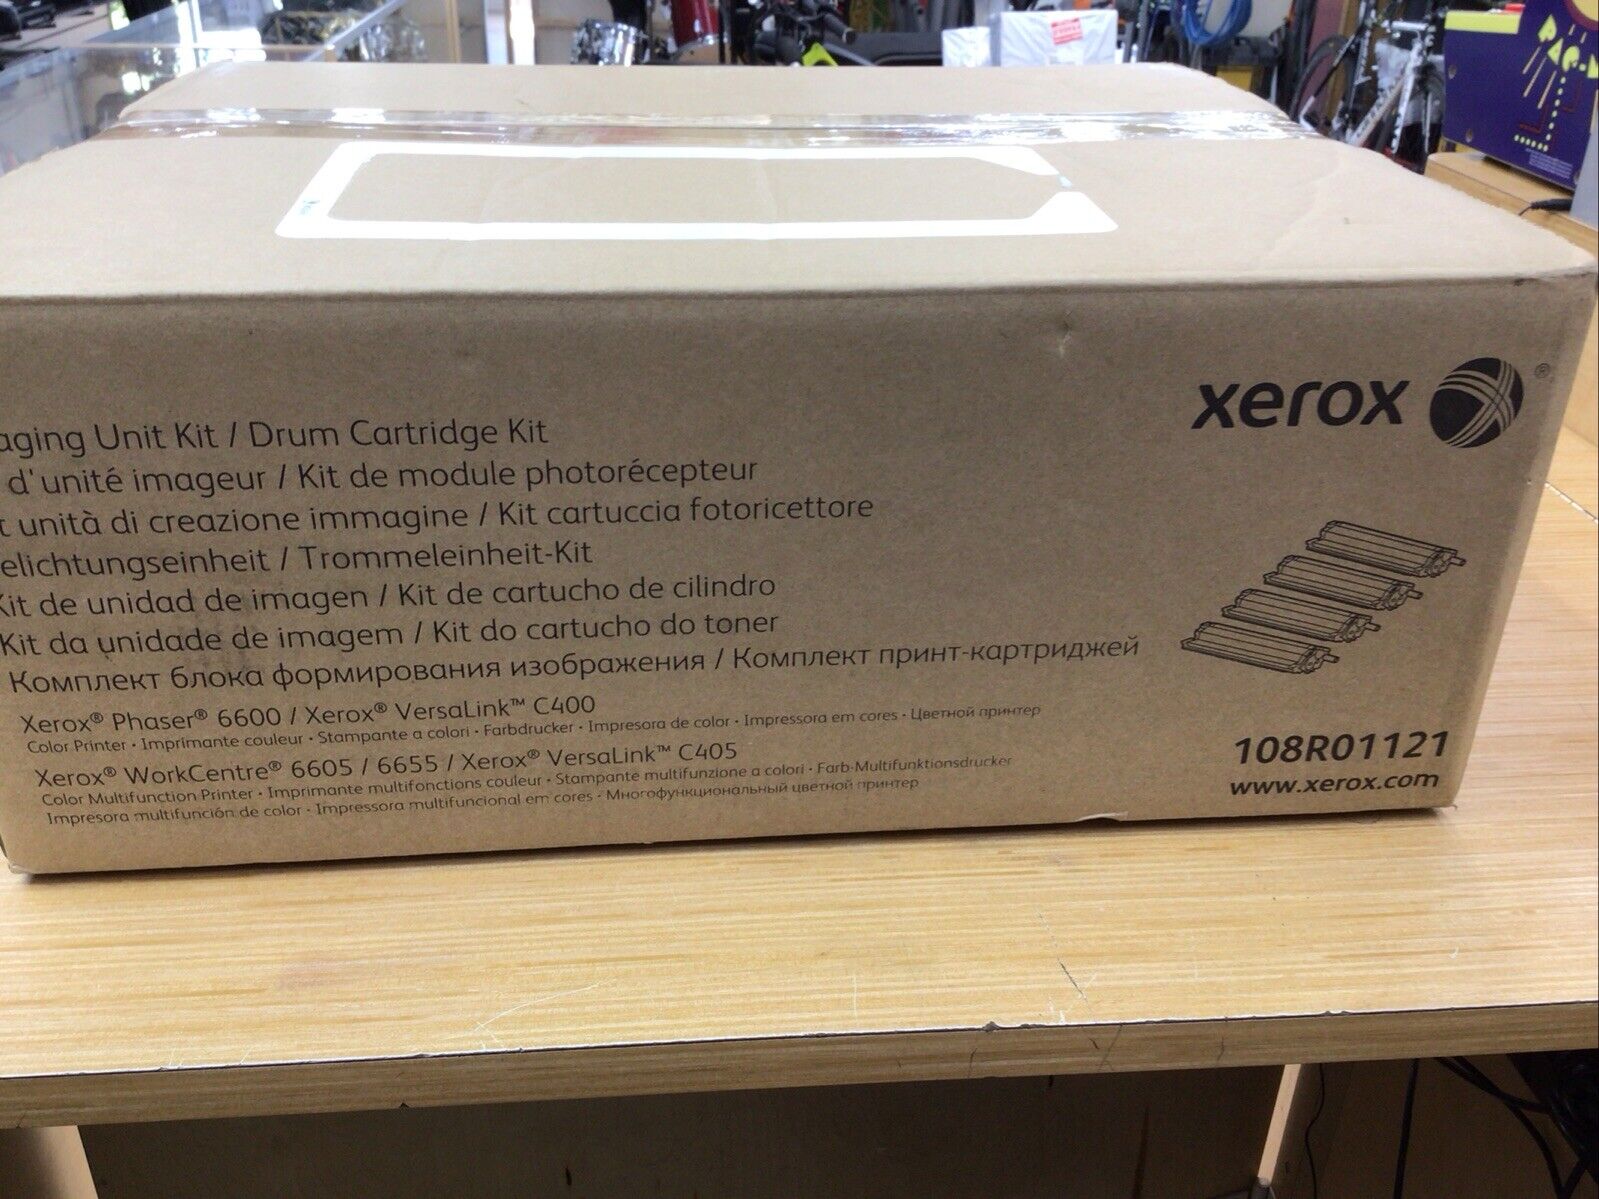 Xerox 108R01121 Phaser 6600, WorkCentre 6605/6655 Imaging Unit Kit -New Open Box